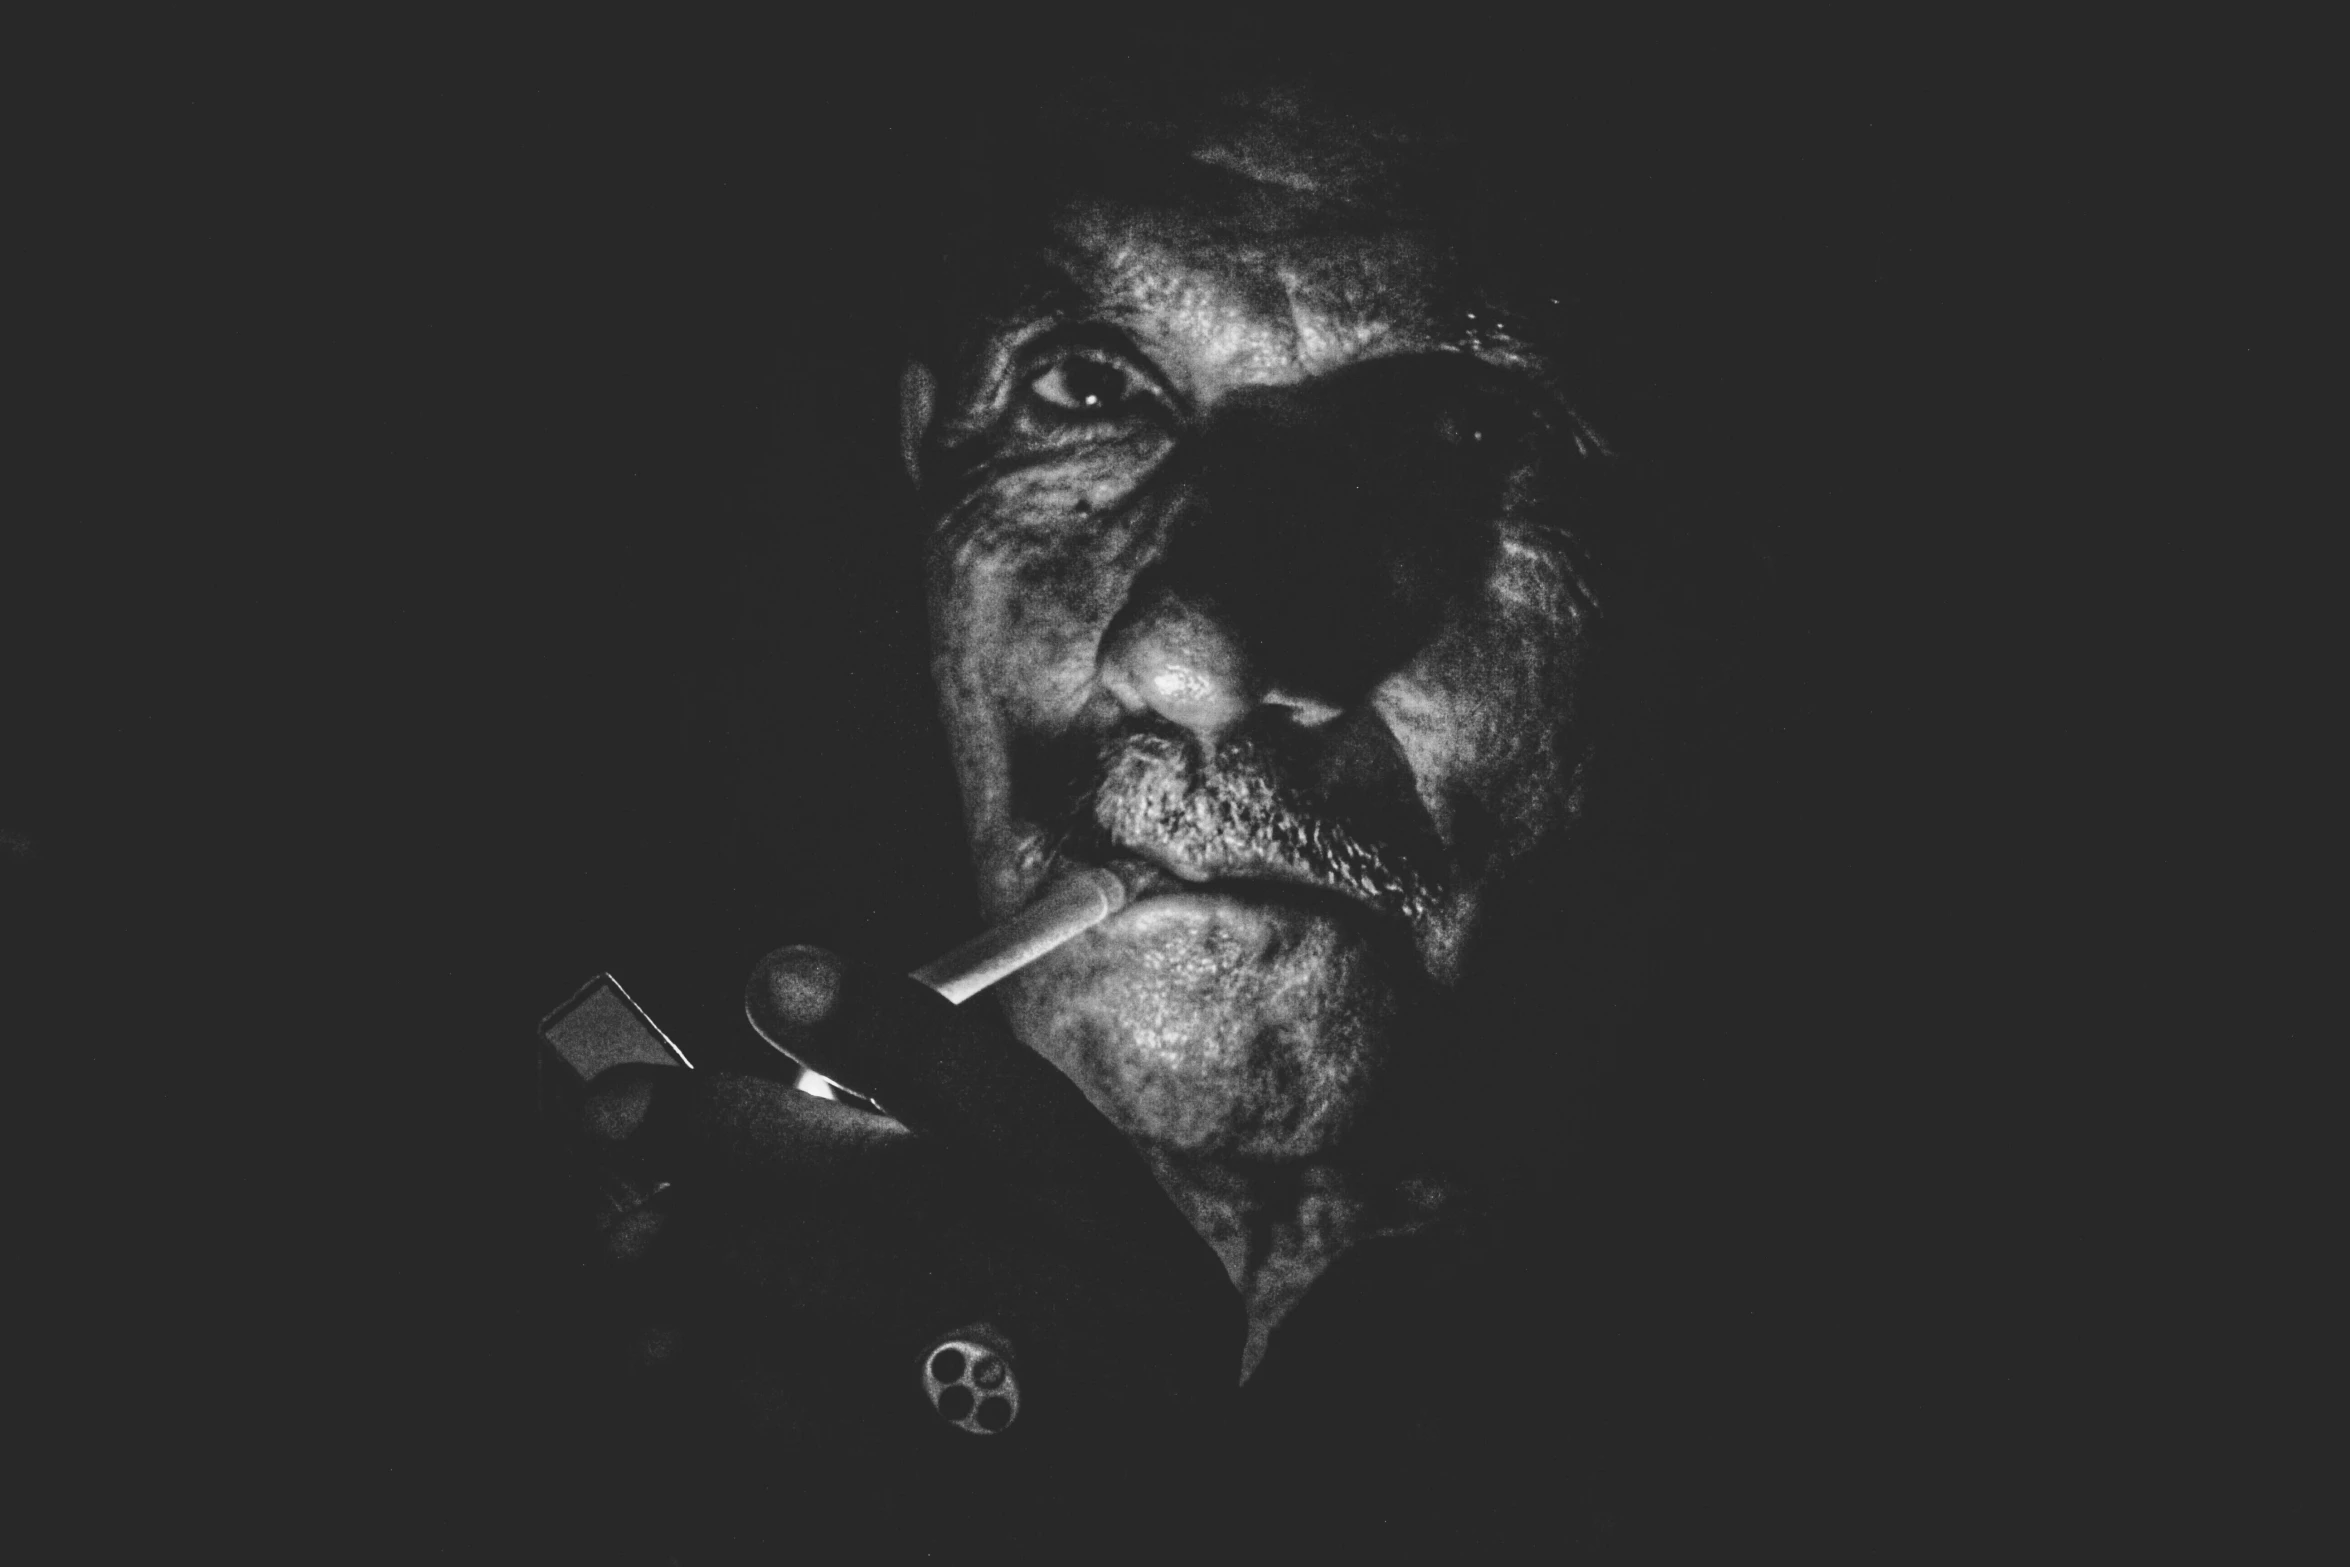 the man is smoking a cigar in the dark